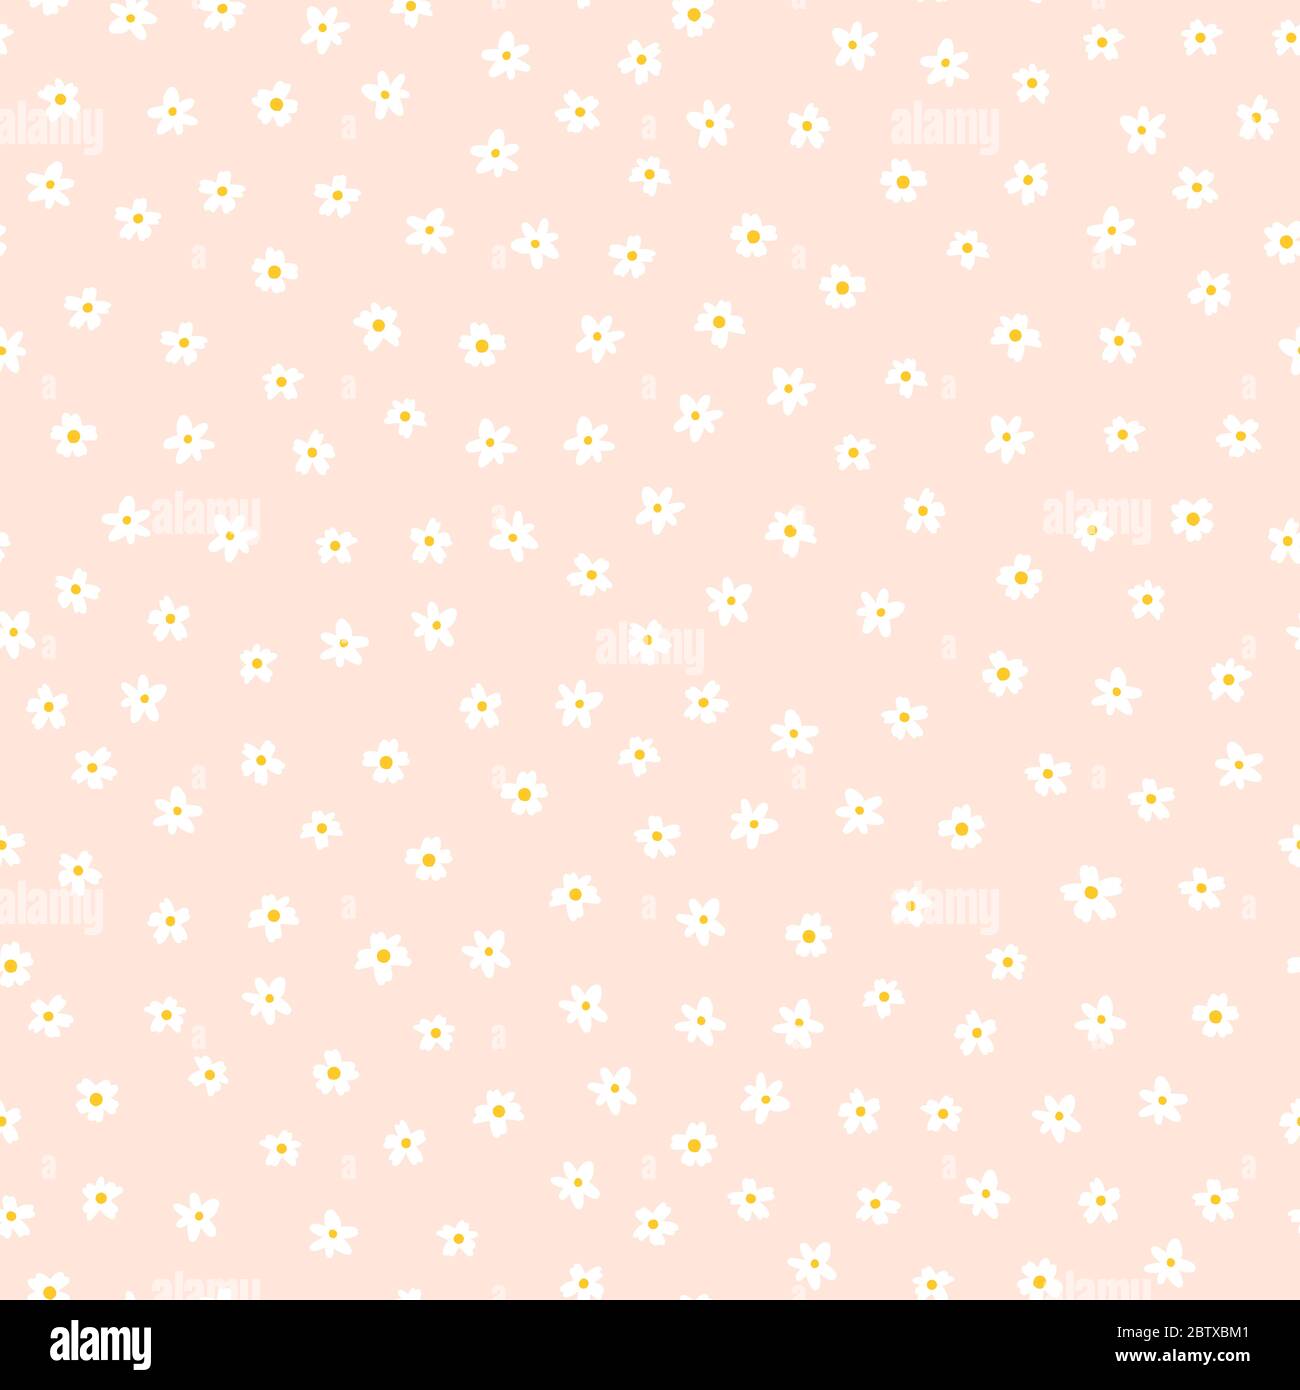 White ditsy flower seamless vector background. Floral pattern with small  white flowers on light pink. Liberty style. Floral repeating texture for  Stock Vector Image & Art - Alamy